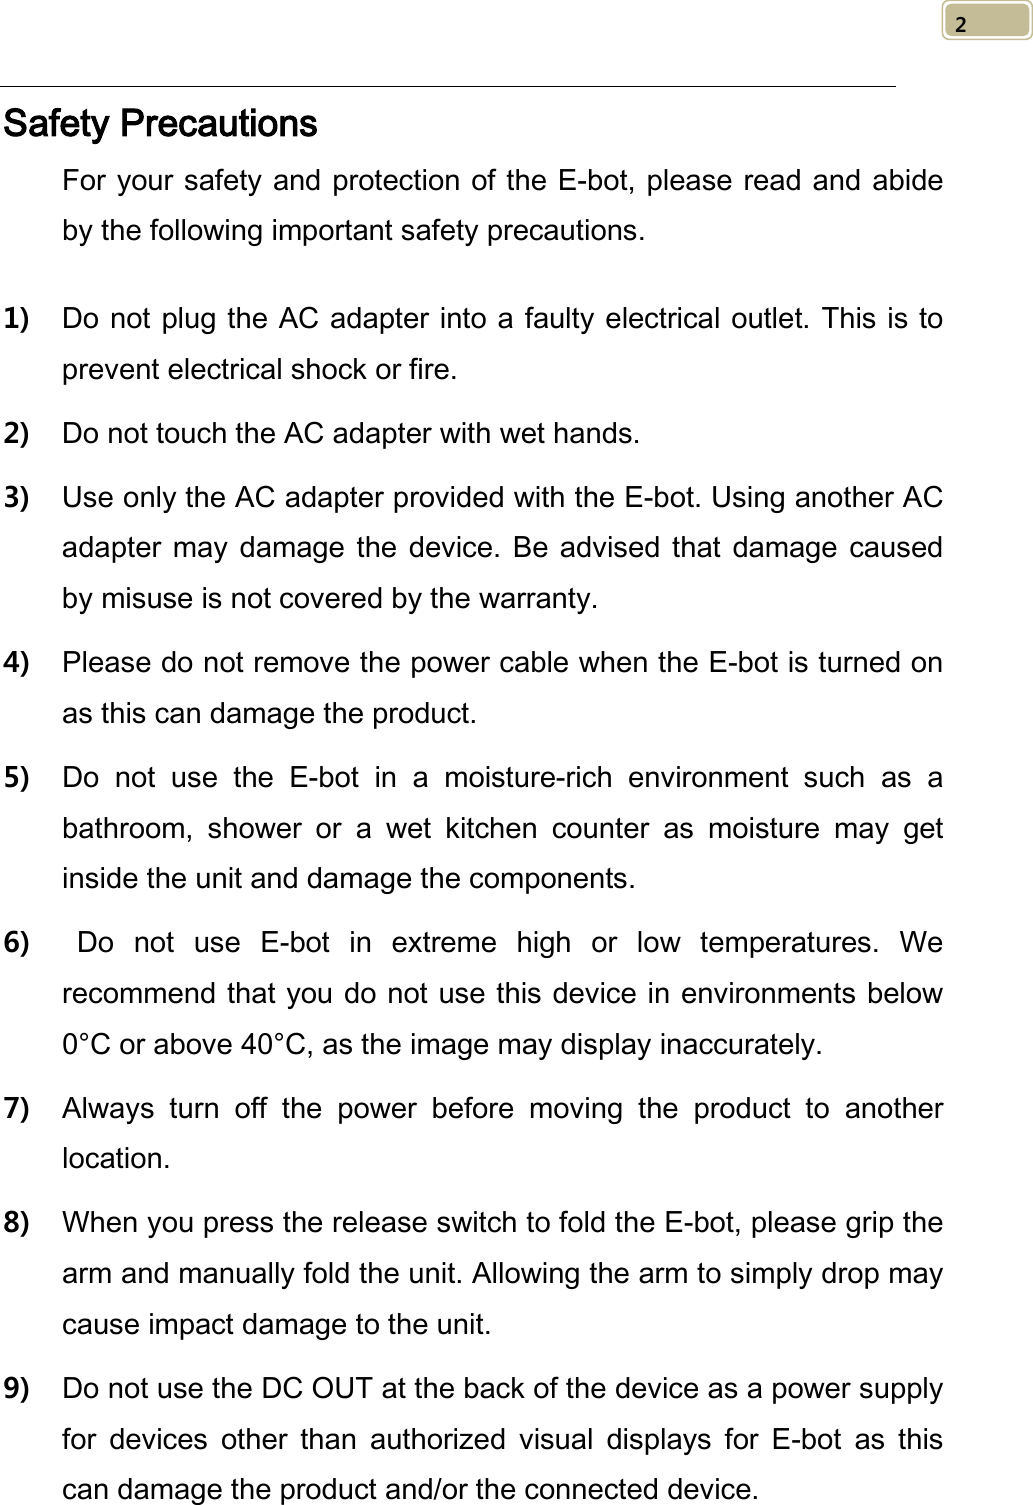   2 Safety Precautions For your safety and protection of the E-bot, please read and abide by the following important safety precautions.  1) Do not plug the AC adapter into a faulty electrical outlet. This is to prevent electrical shock or fire. 2) Do not touch the AC adapter with wet hands. 3) Use only the AC adapter provided with the E-bot. Using another AC adapter may damage the device. Be advised that damage caused by misuse is not covered by the warranty. 4) Please do not remove the power cable when the E-bot is turned on as this can damage the product.   5) Do not use the E-bot in a moisture-rich environment such as a bathroom, shower or a wet kitchen counter as moisture may get inside the unit and damage the components.   6)   Do not use E-bot in extreme high or low temperatures. We recommend that you do not use this device in environments below 0°C or above 40°C, as the image may display inaccurately. 7) Always turn off the power before moving the product to another location. 8) When you press the release switch to fold the E-bot, please grip the arm and manually fold the unit. Allowing the arm to simply drop may cause impact damage to the unit. 9) Do not use the DC OUT at the back of the device as a power supply for devices other than authorized visual displays for E-bot  as this can damage the product and/or the connected device. 